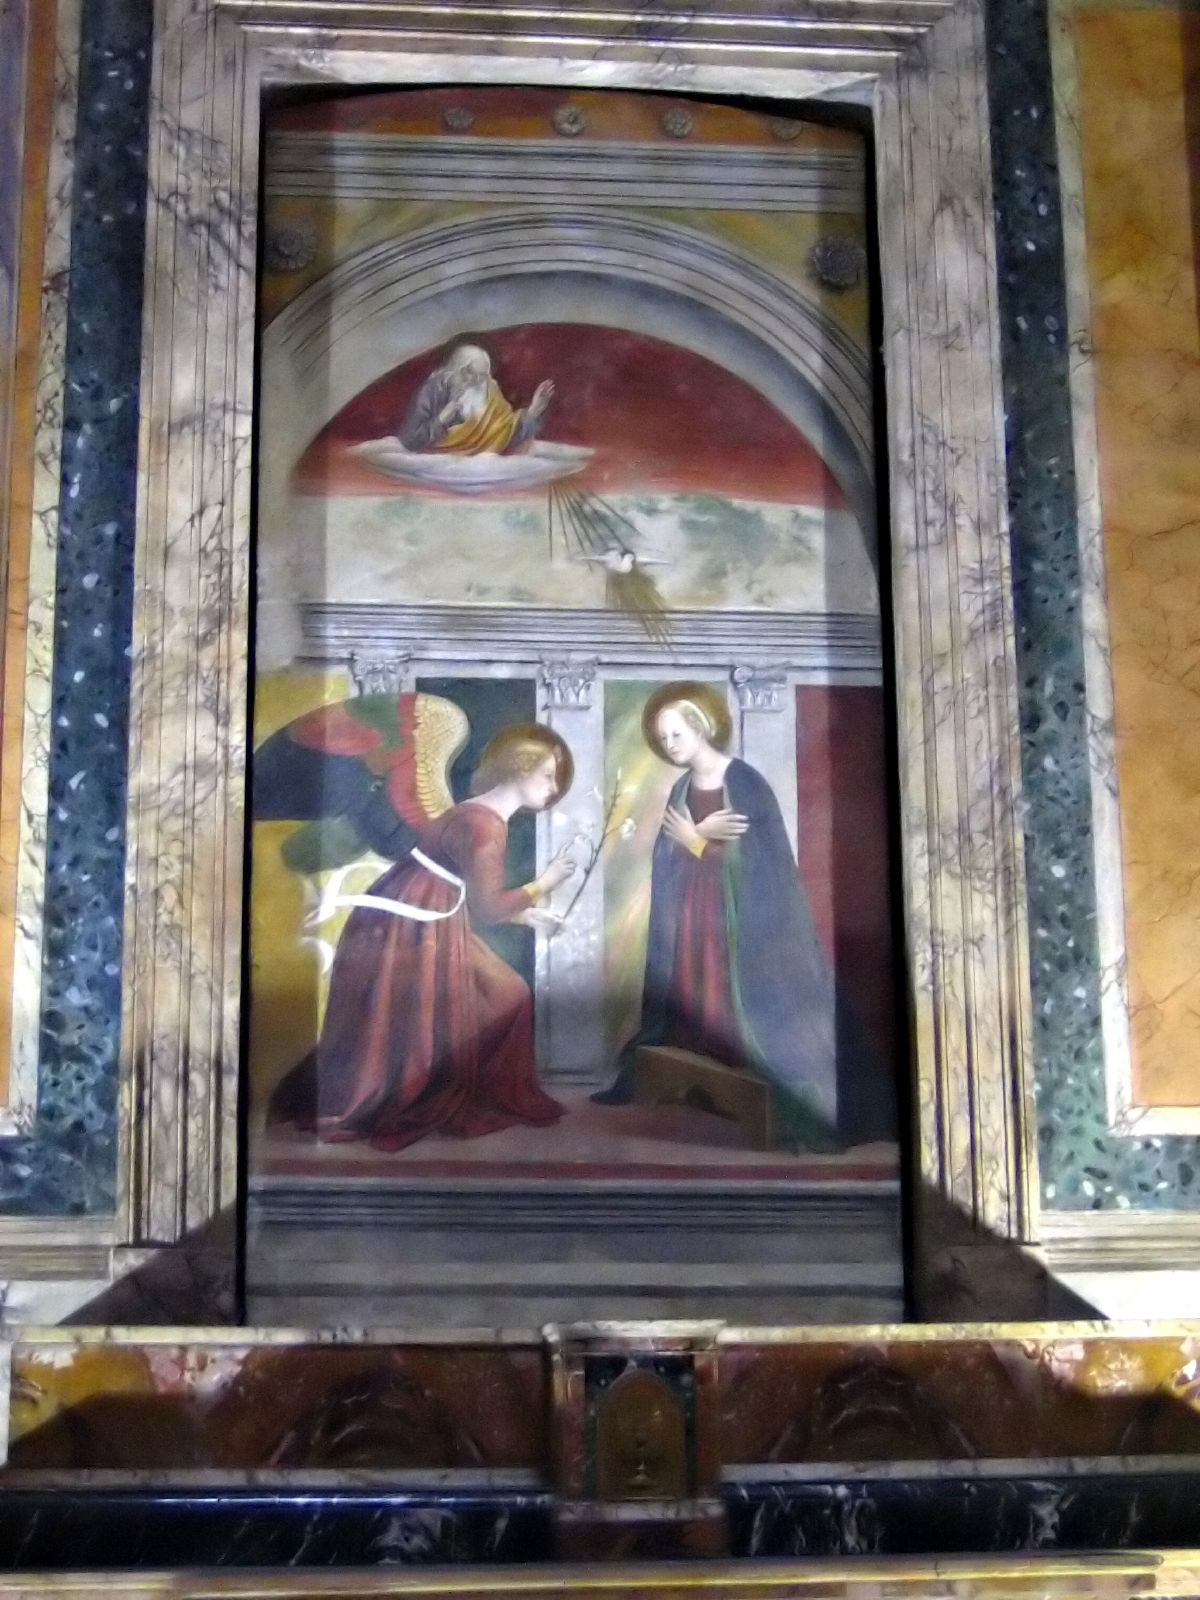 a religious scene with a painting on the wall